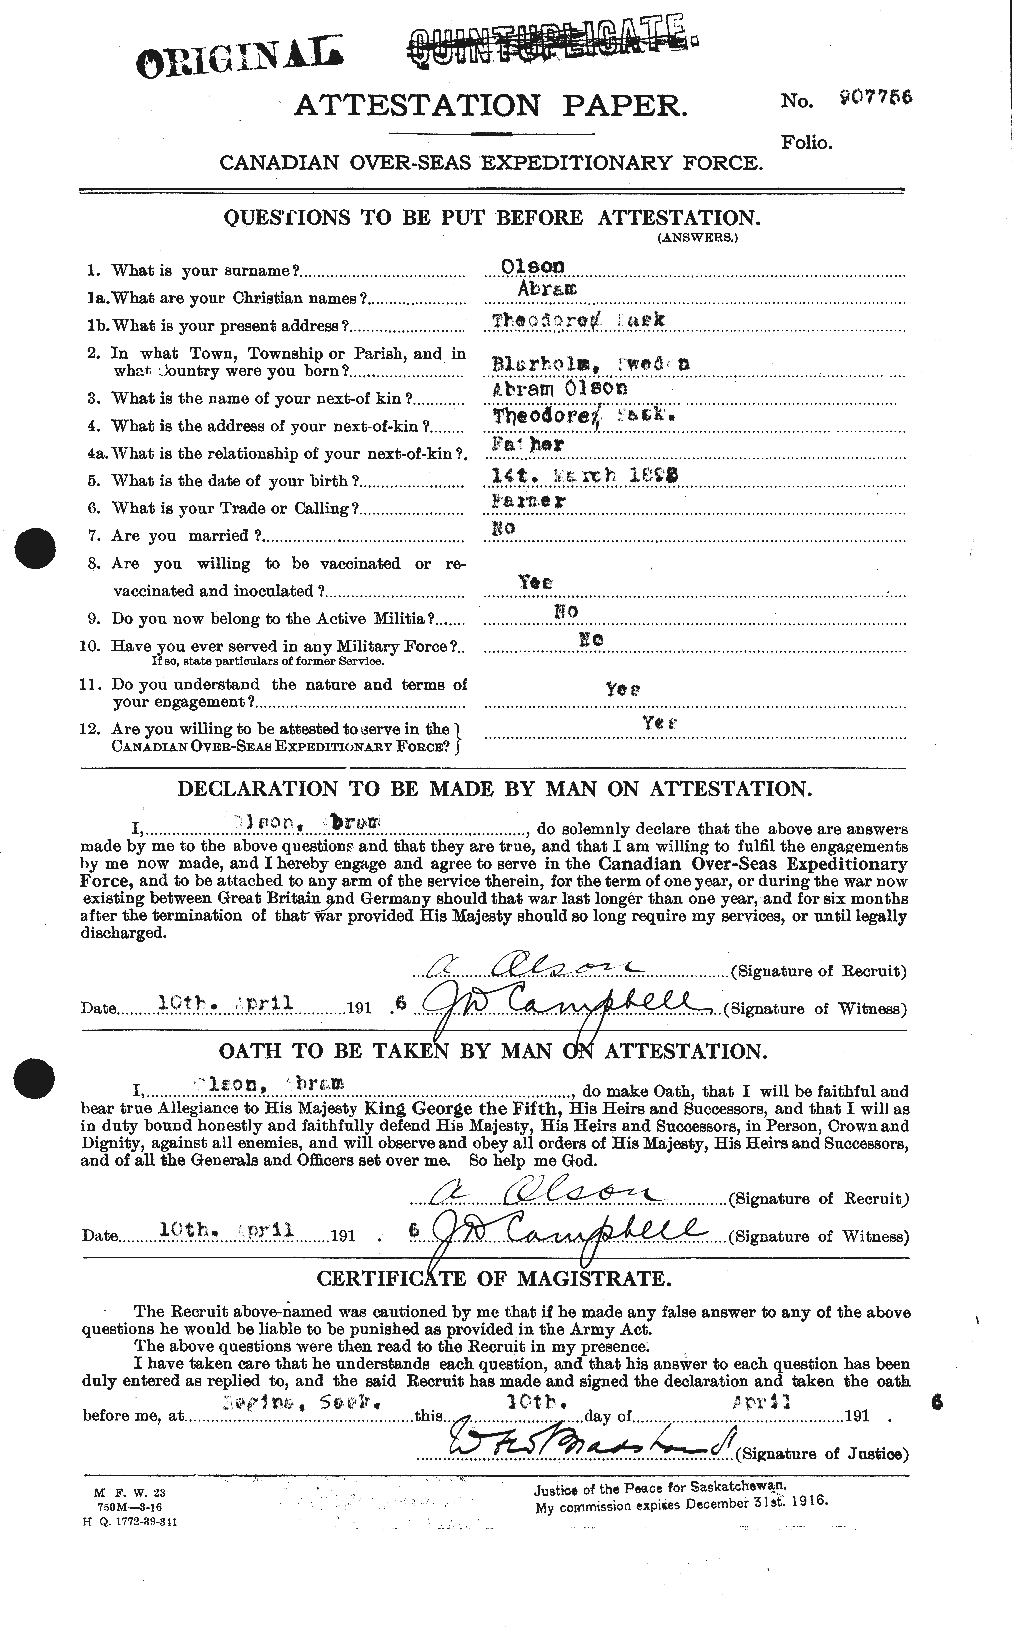 Personnel Records of the First World War - CEF 557122a